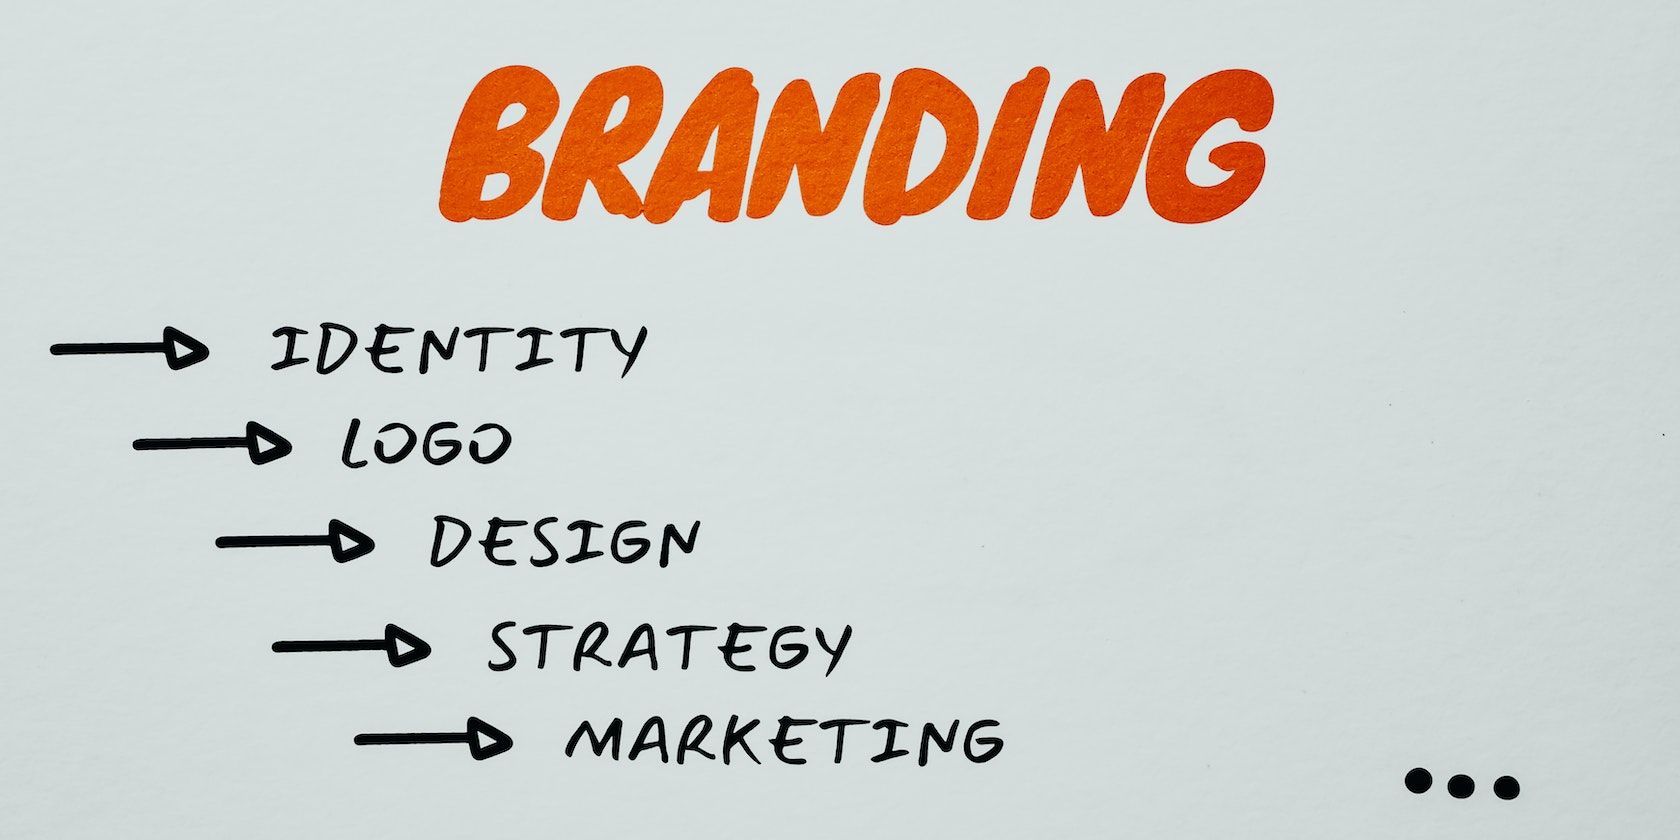 An image listing various aspects of branding